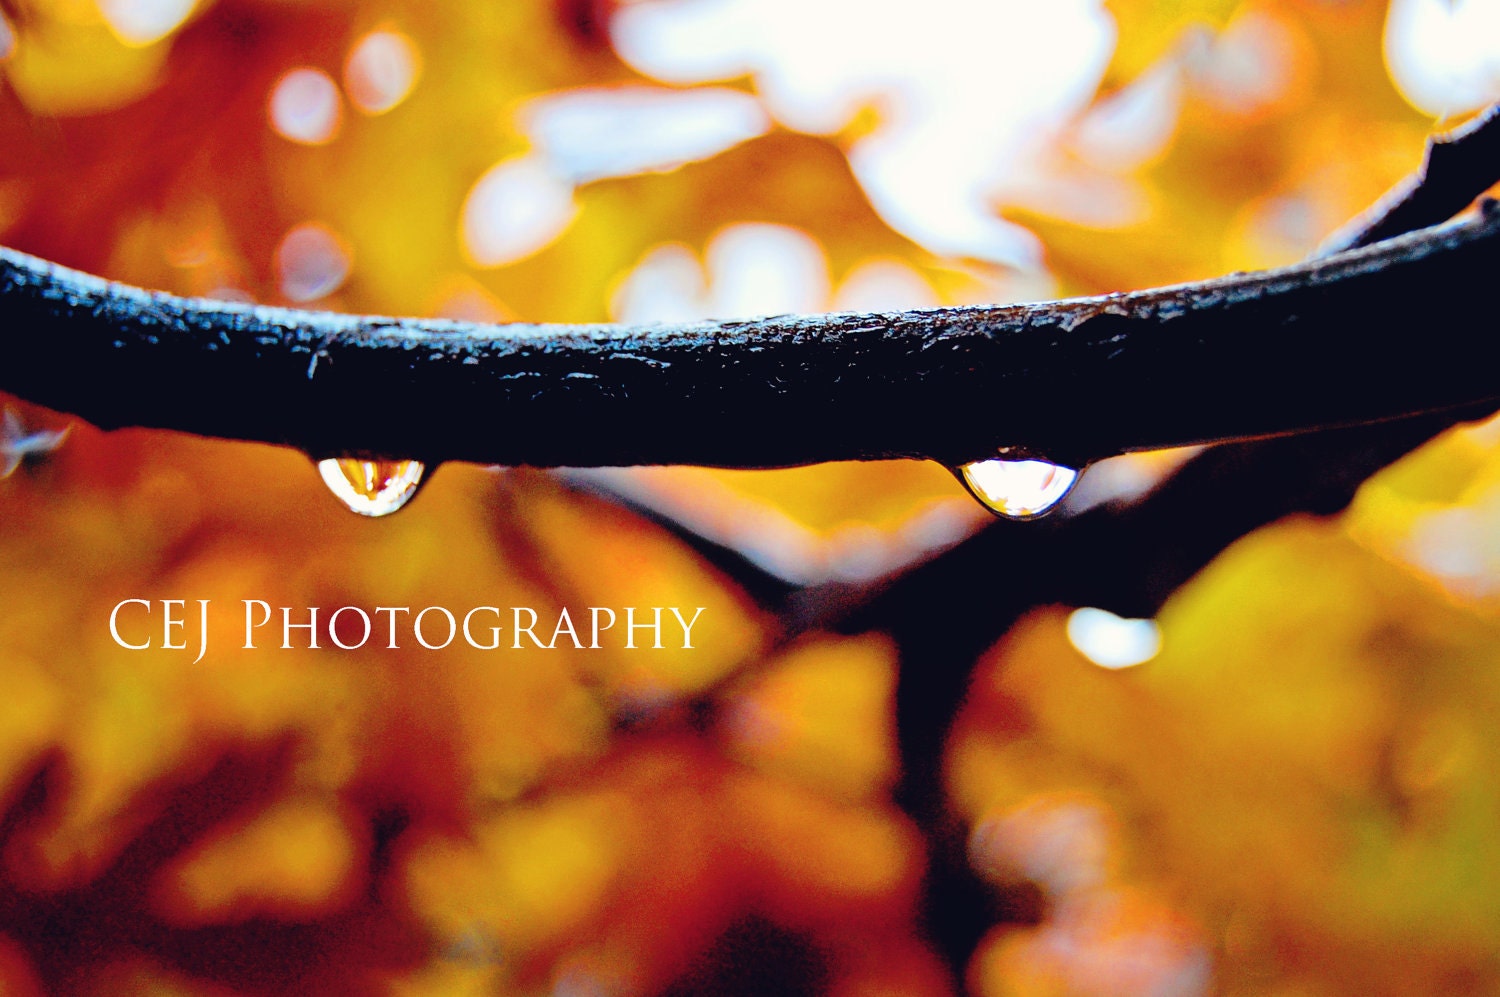 Water Droplets - CEJPhotography